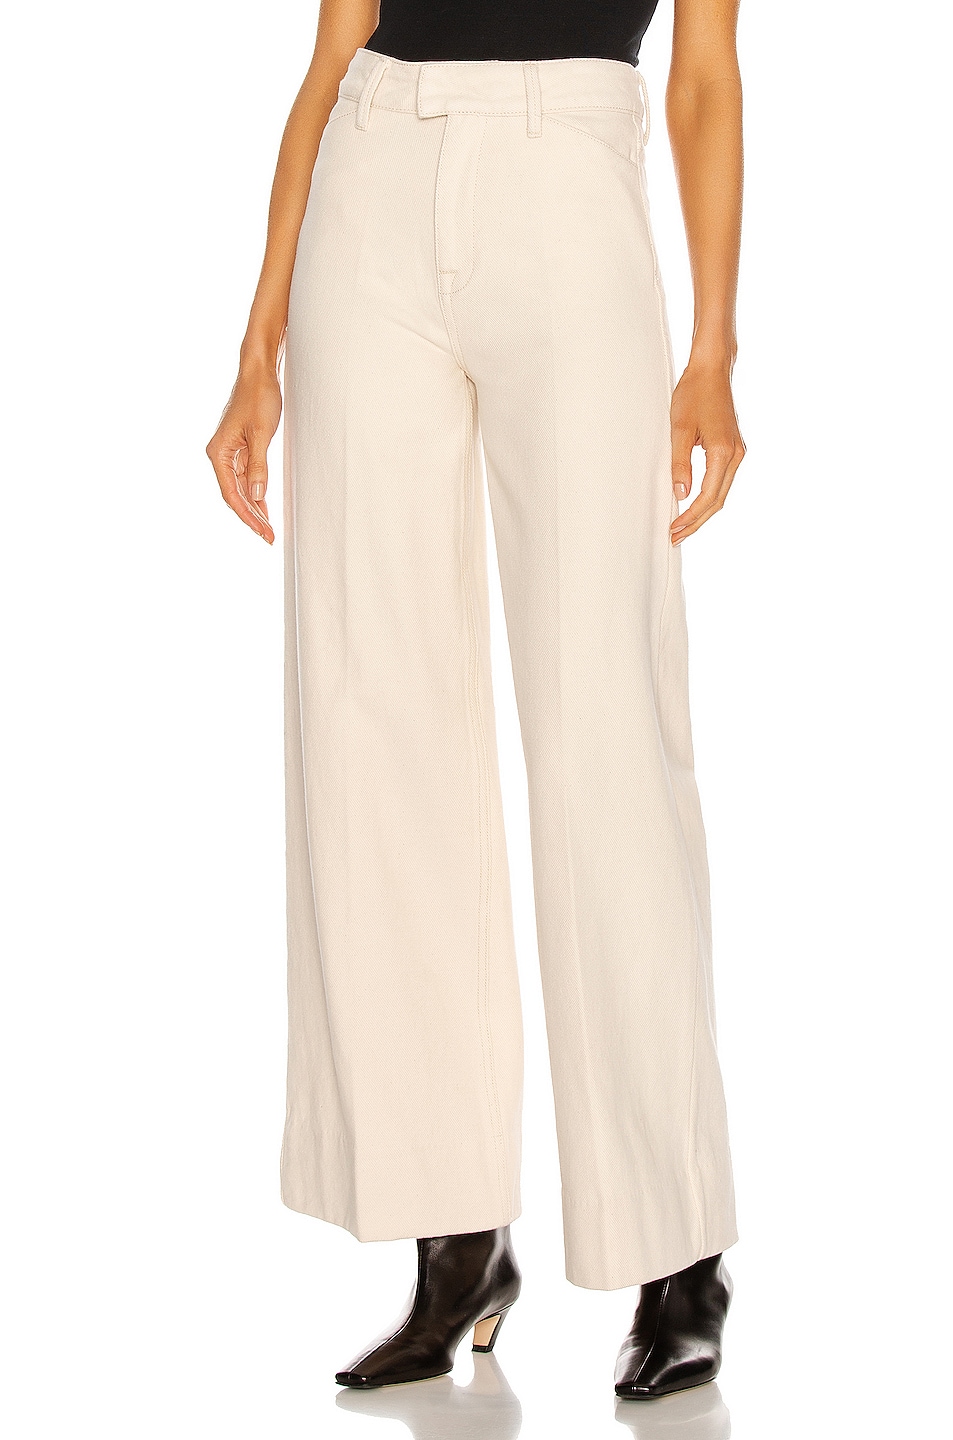 Image 1 of REMAIN Bernadette High Waist Pant in White Asparagus